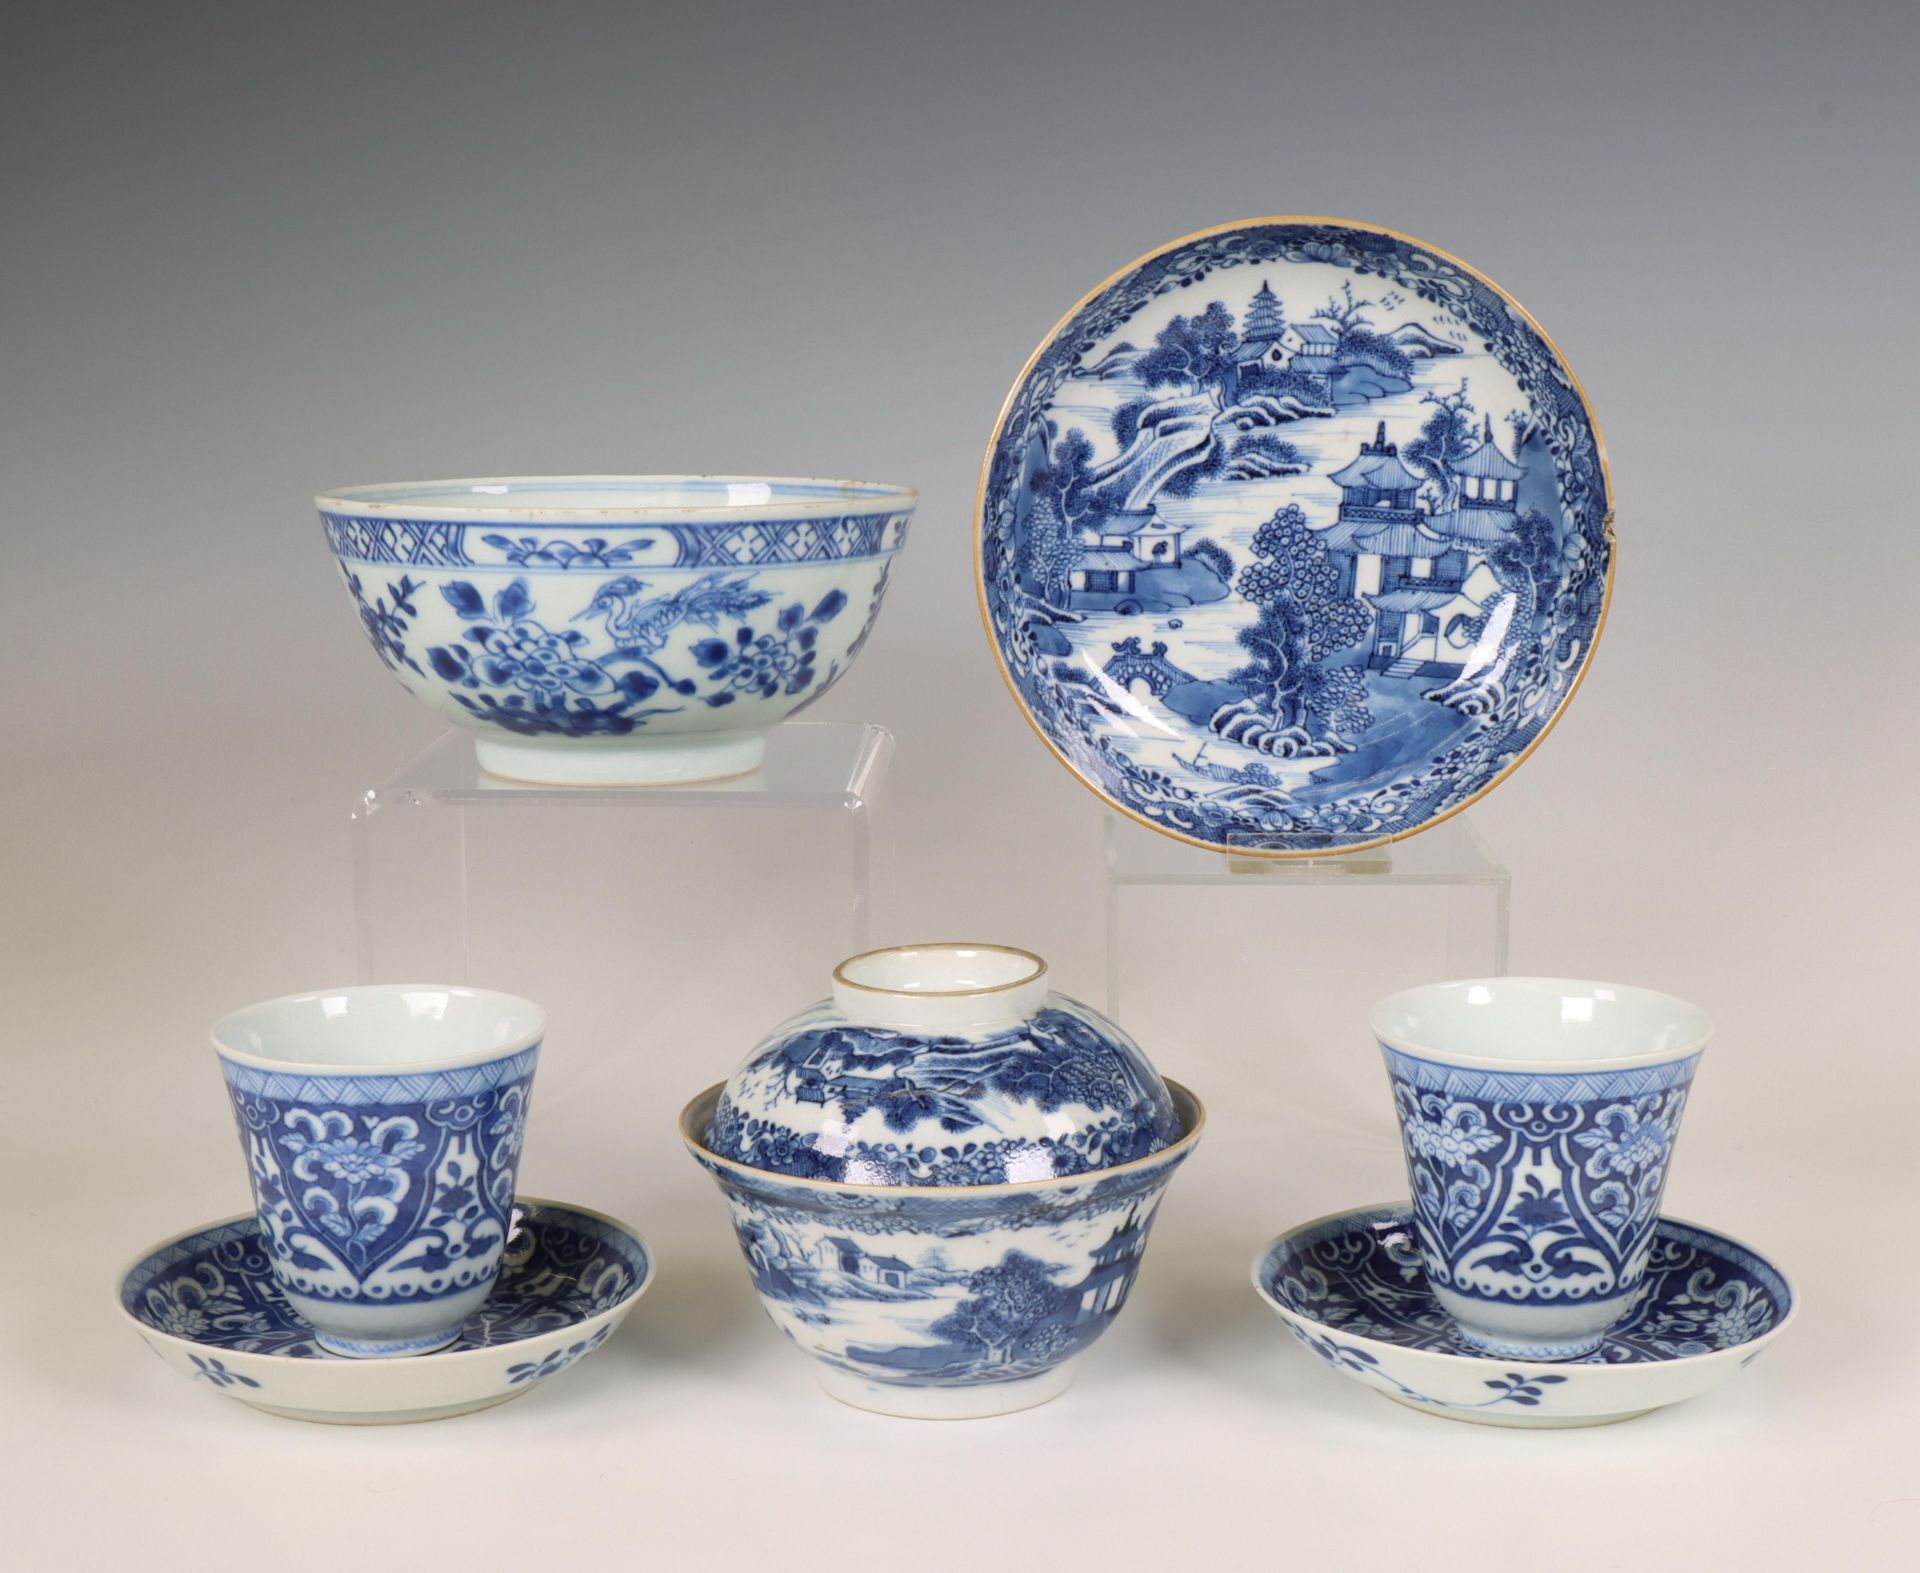 China, small collection of blue and white porcelain, 18th-19th century,